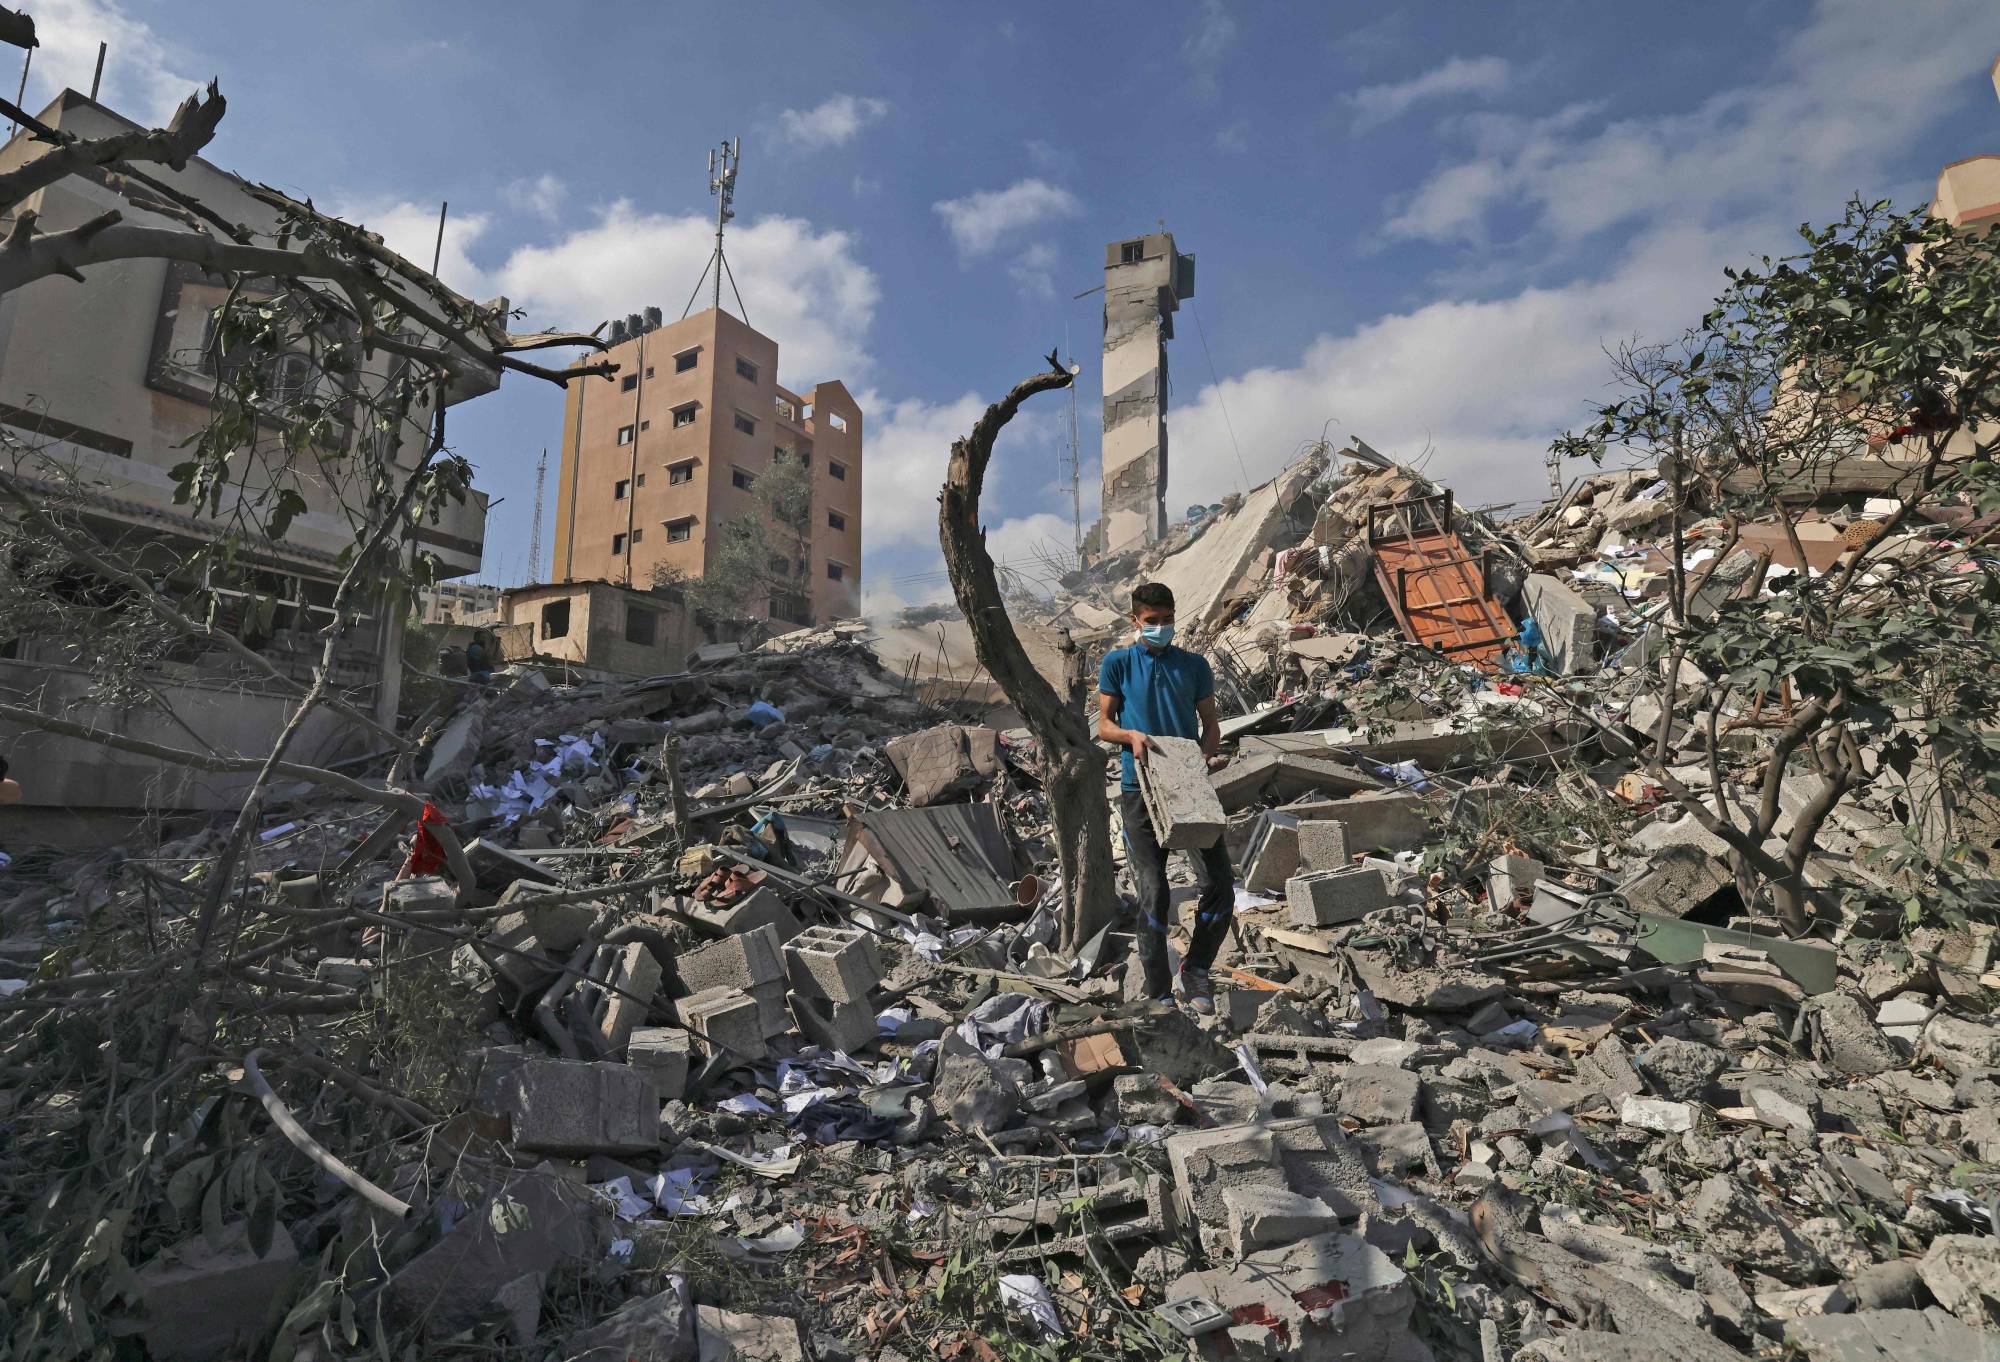 A Palestinian youth looks for salvageable items amid the rubble of the Kuhail building, which was destroyed in an early morning Israeli airstrike on Gaza City